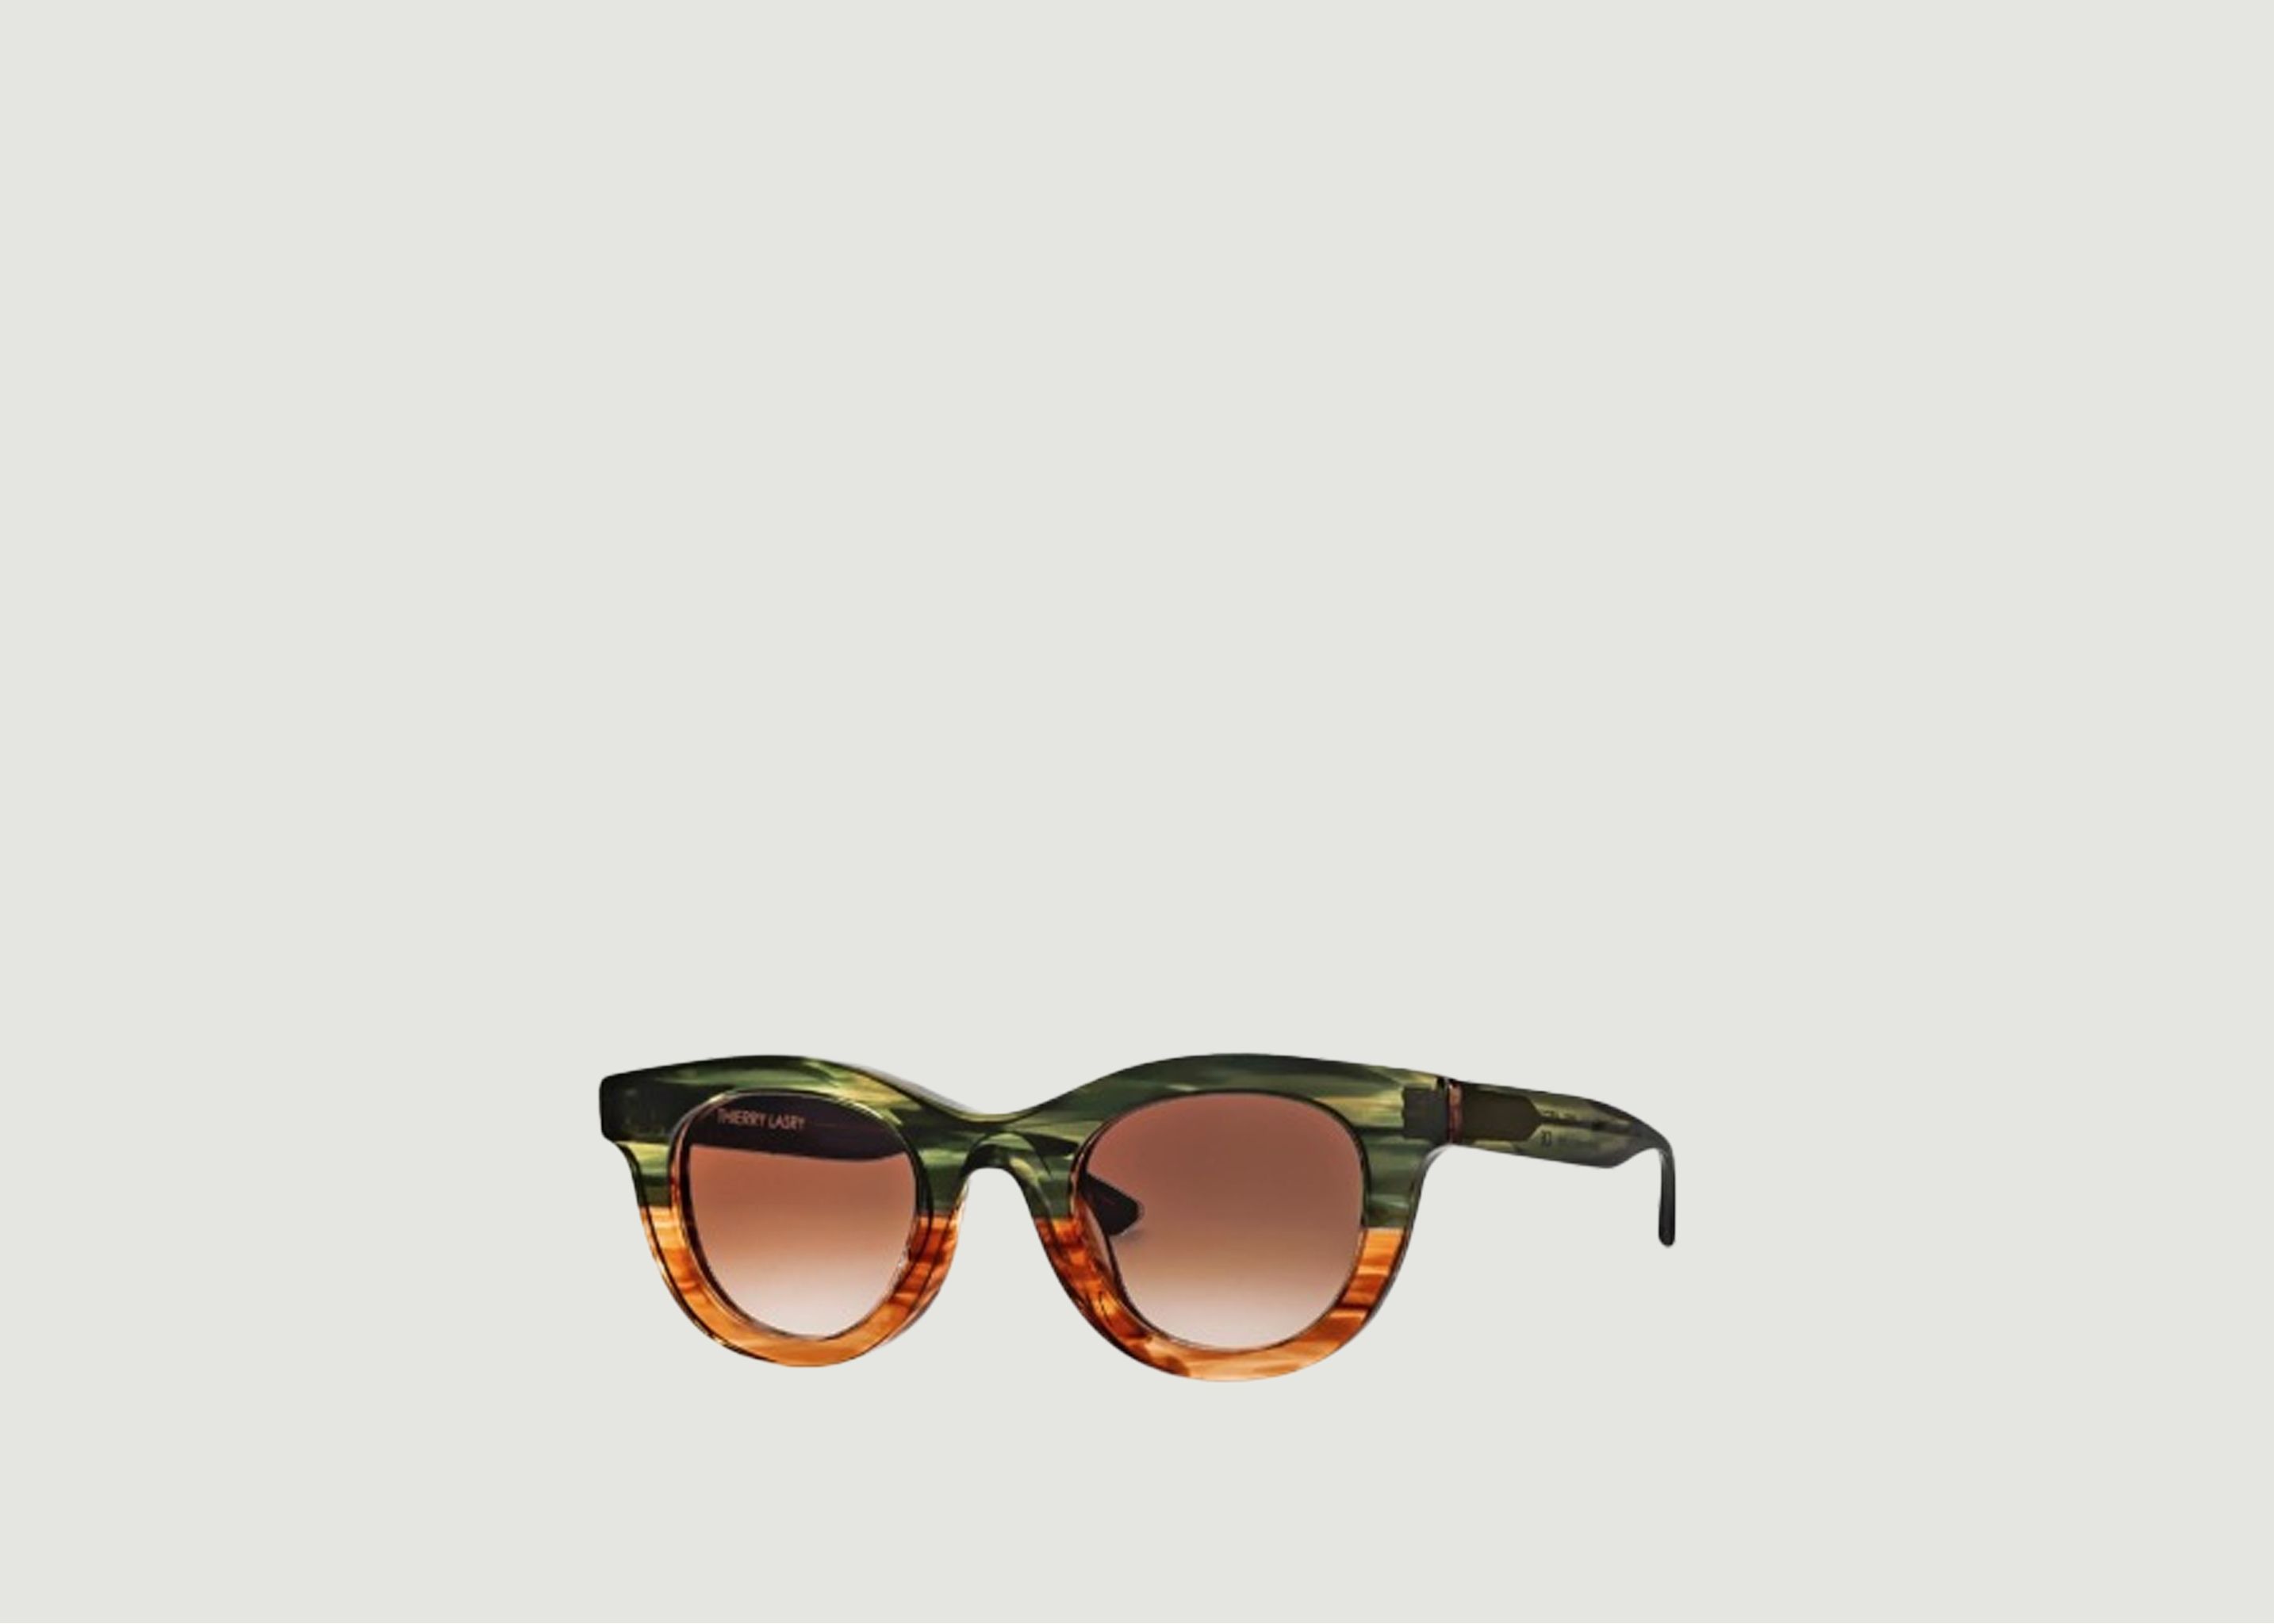 Consistency Sonnenbrille - Thierry Lasry